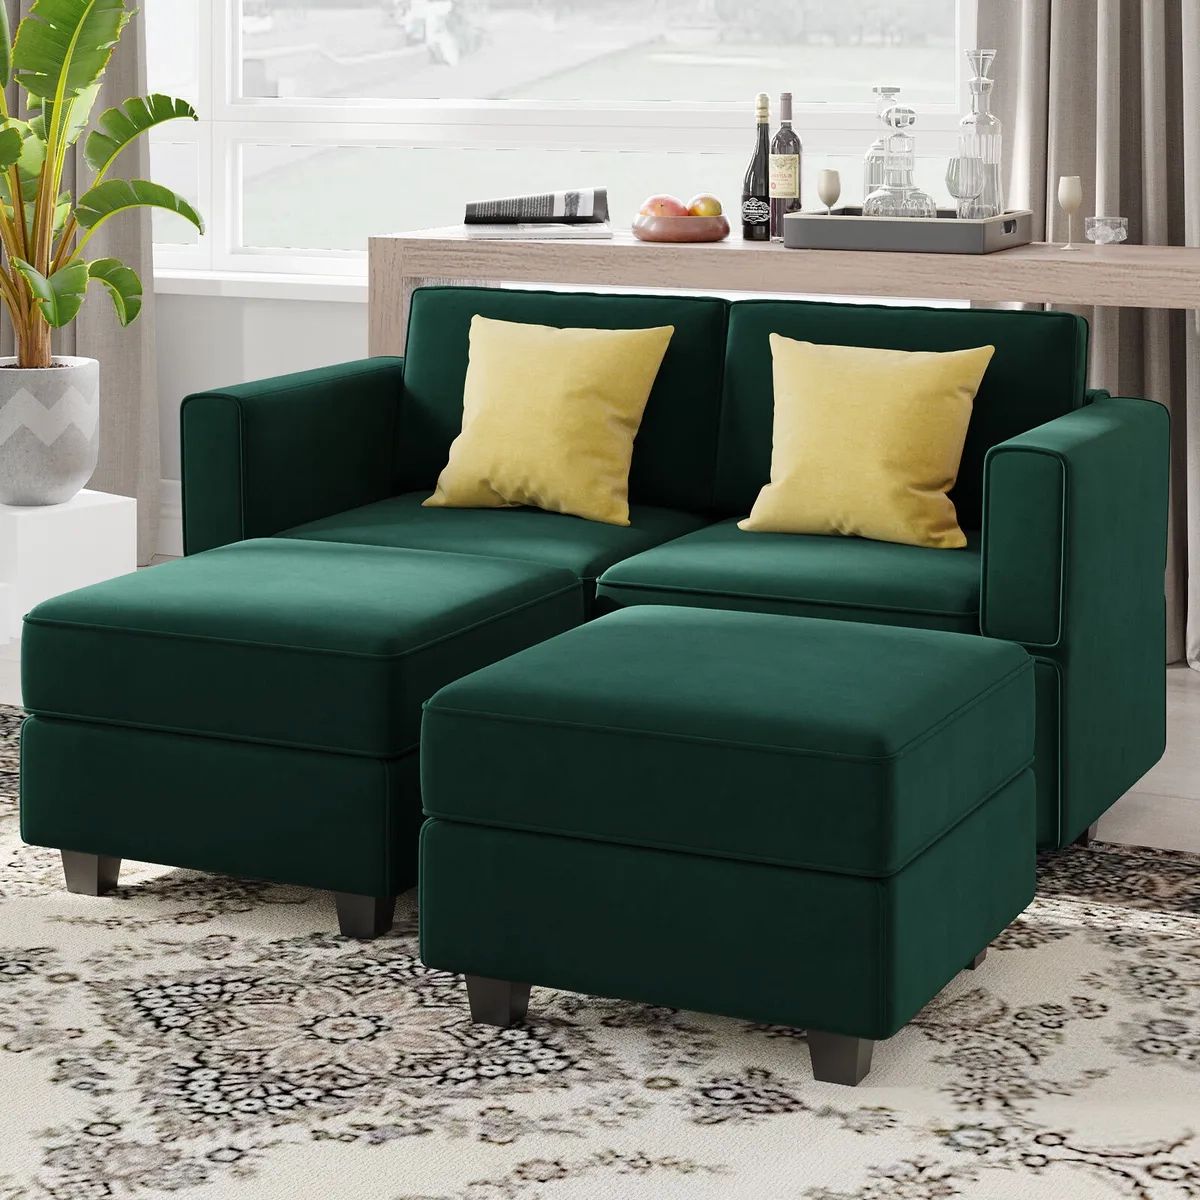 Belffin Modular Sectional Sofa With Storage Oversized Couch Bed Velvet Green  | Ebay Within Green Velvet Modular Sectionals (View 13 of 15)